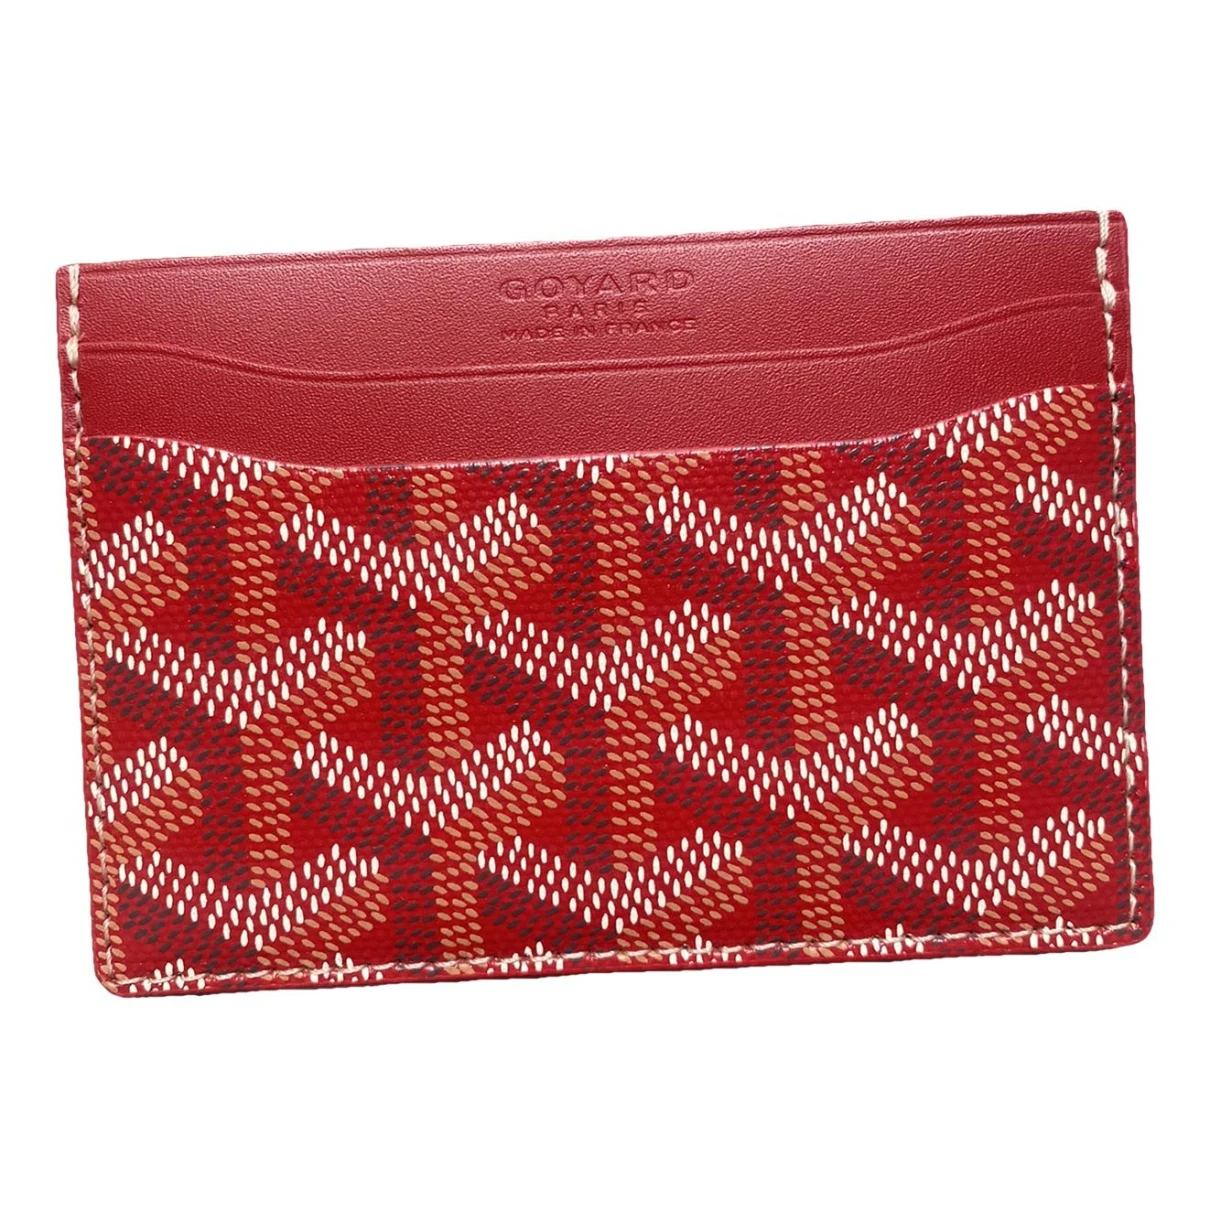 Pre-owned Goyard Saint Sulpice Leather Small Bag In Red